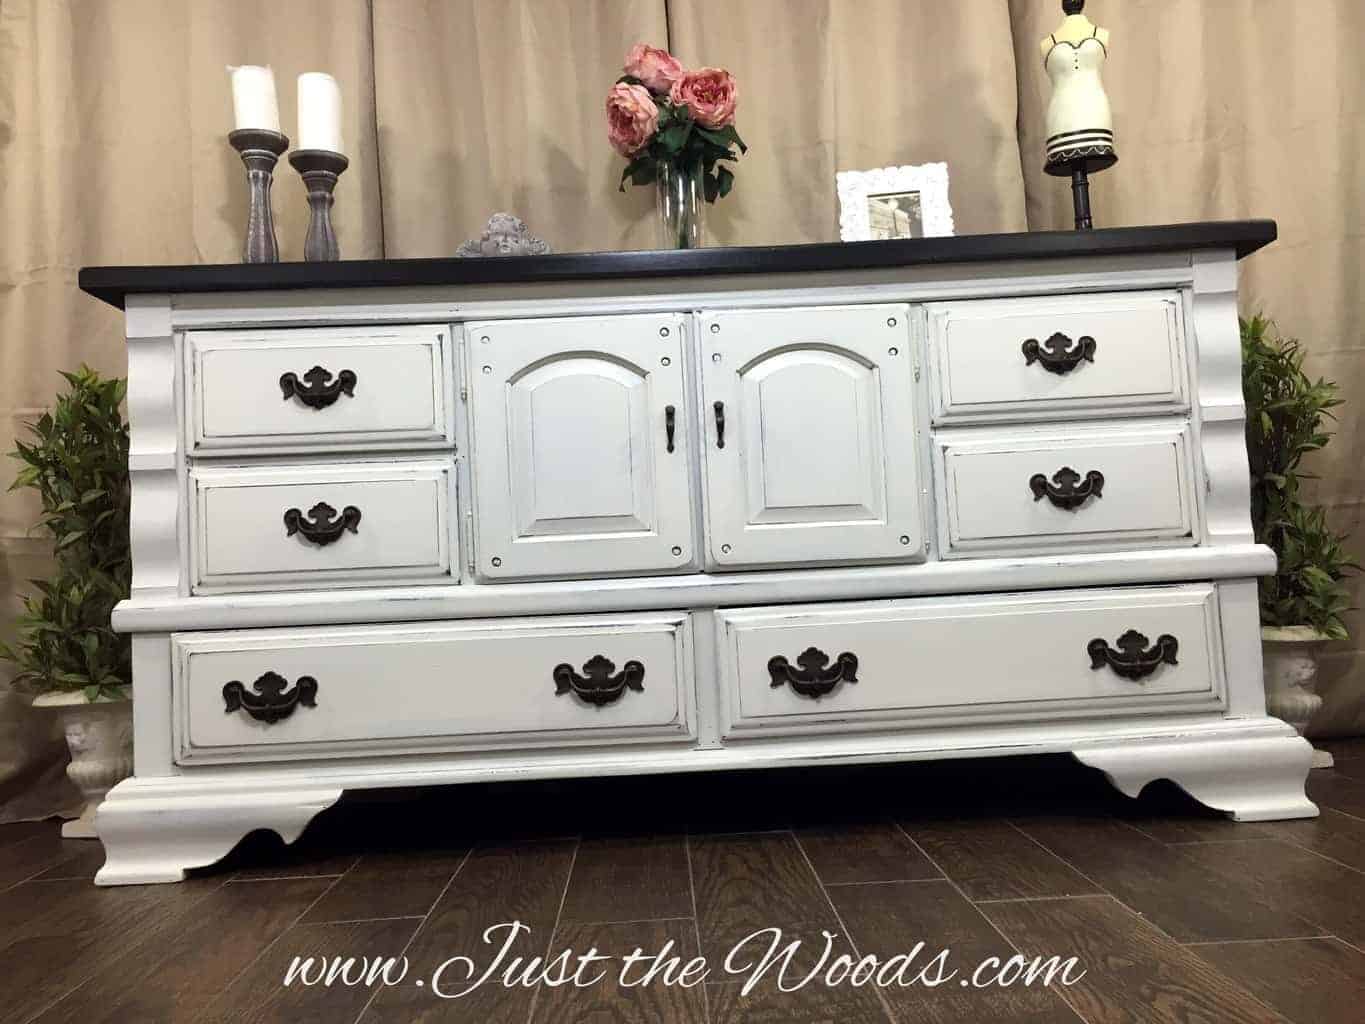 How To Paint A Distressed White Dresser, Vintage Painted Dresser